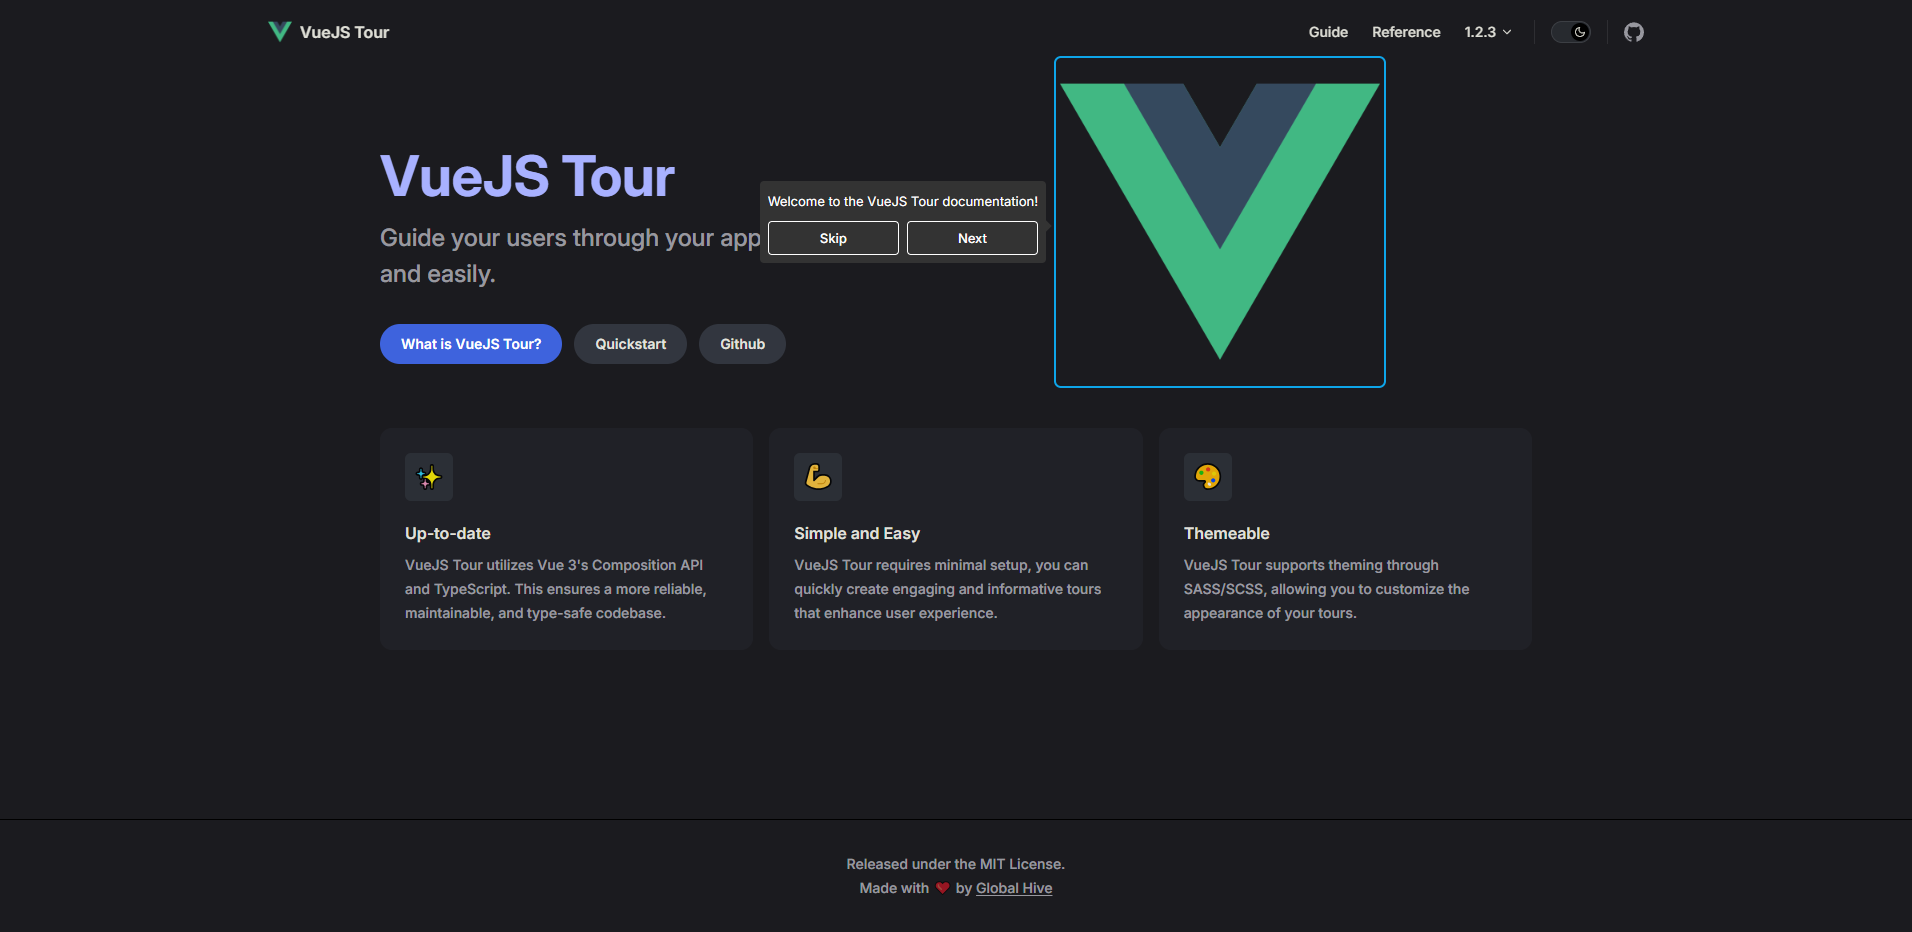 startuptile VueJS Tour-Guide your users through your application easily